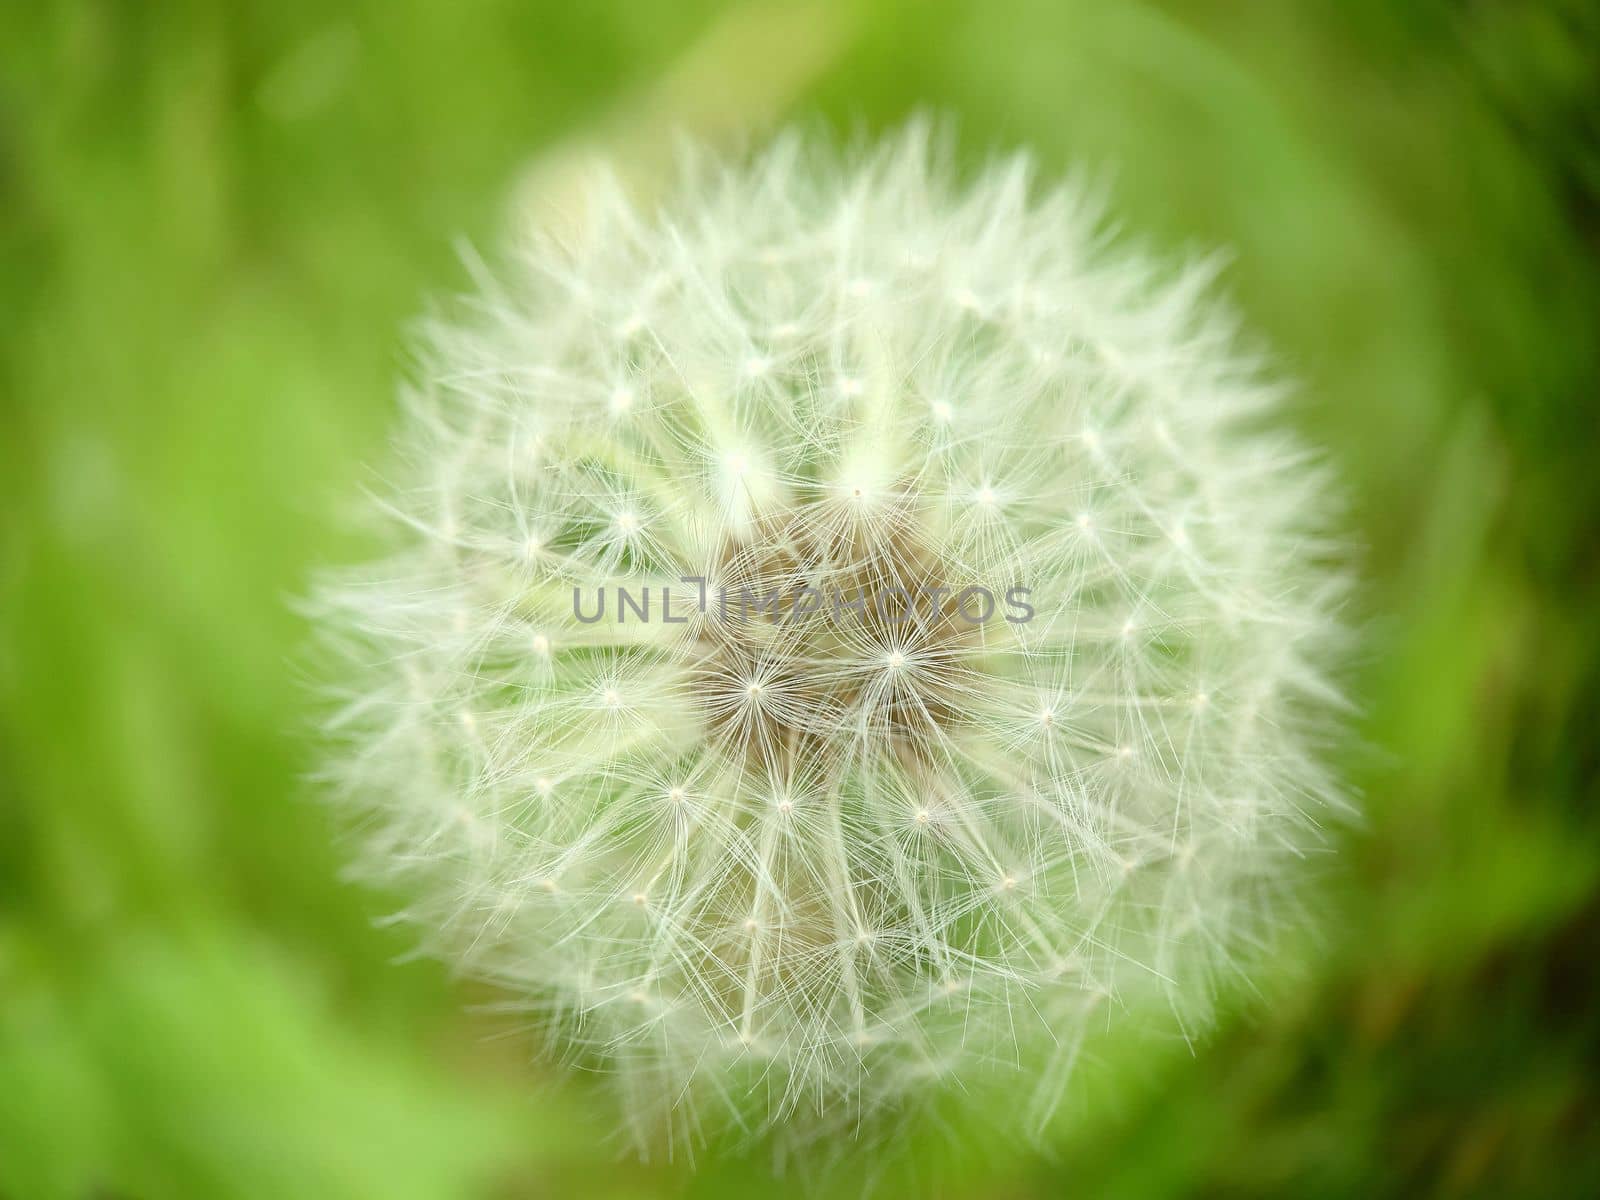 Ripe spherical fluffy dandelion bud close-up on a grass background by Mastak80